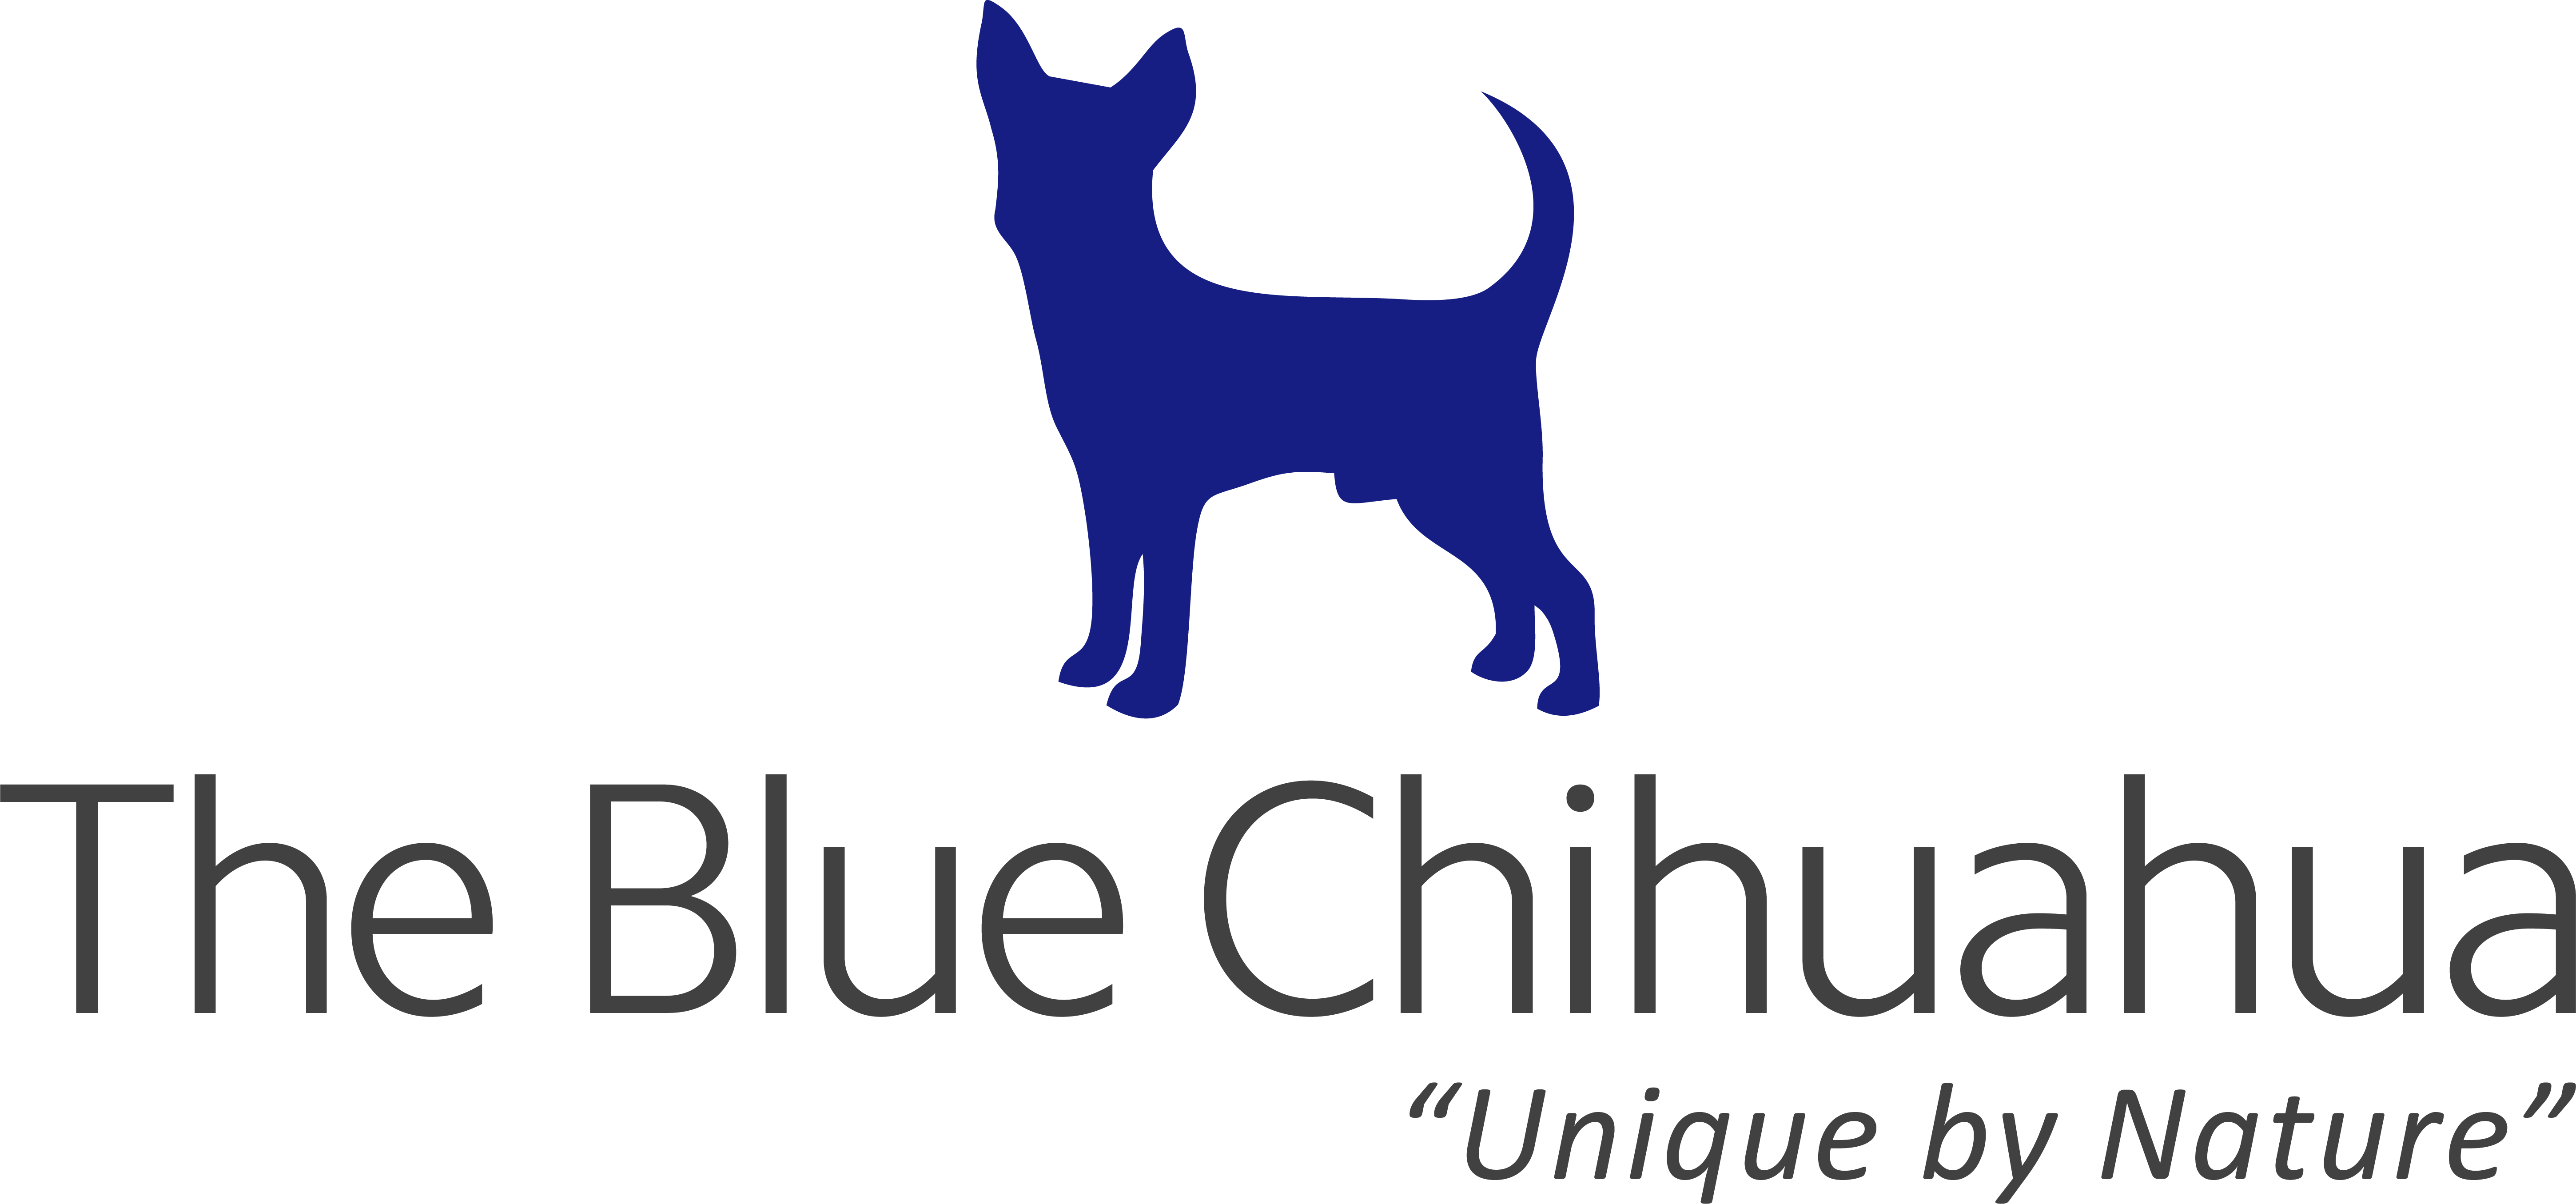 The Blue Chihuahua To Launch Website Soon, Prepares Massive Treasure Hunt For Users